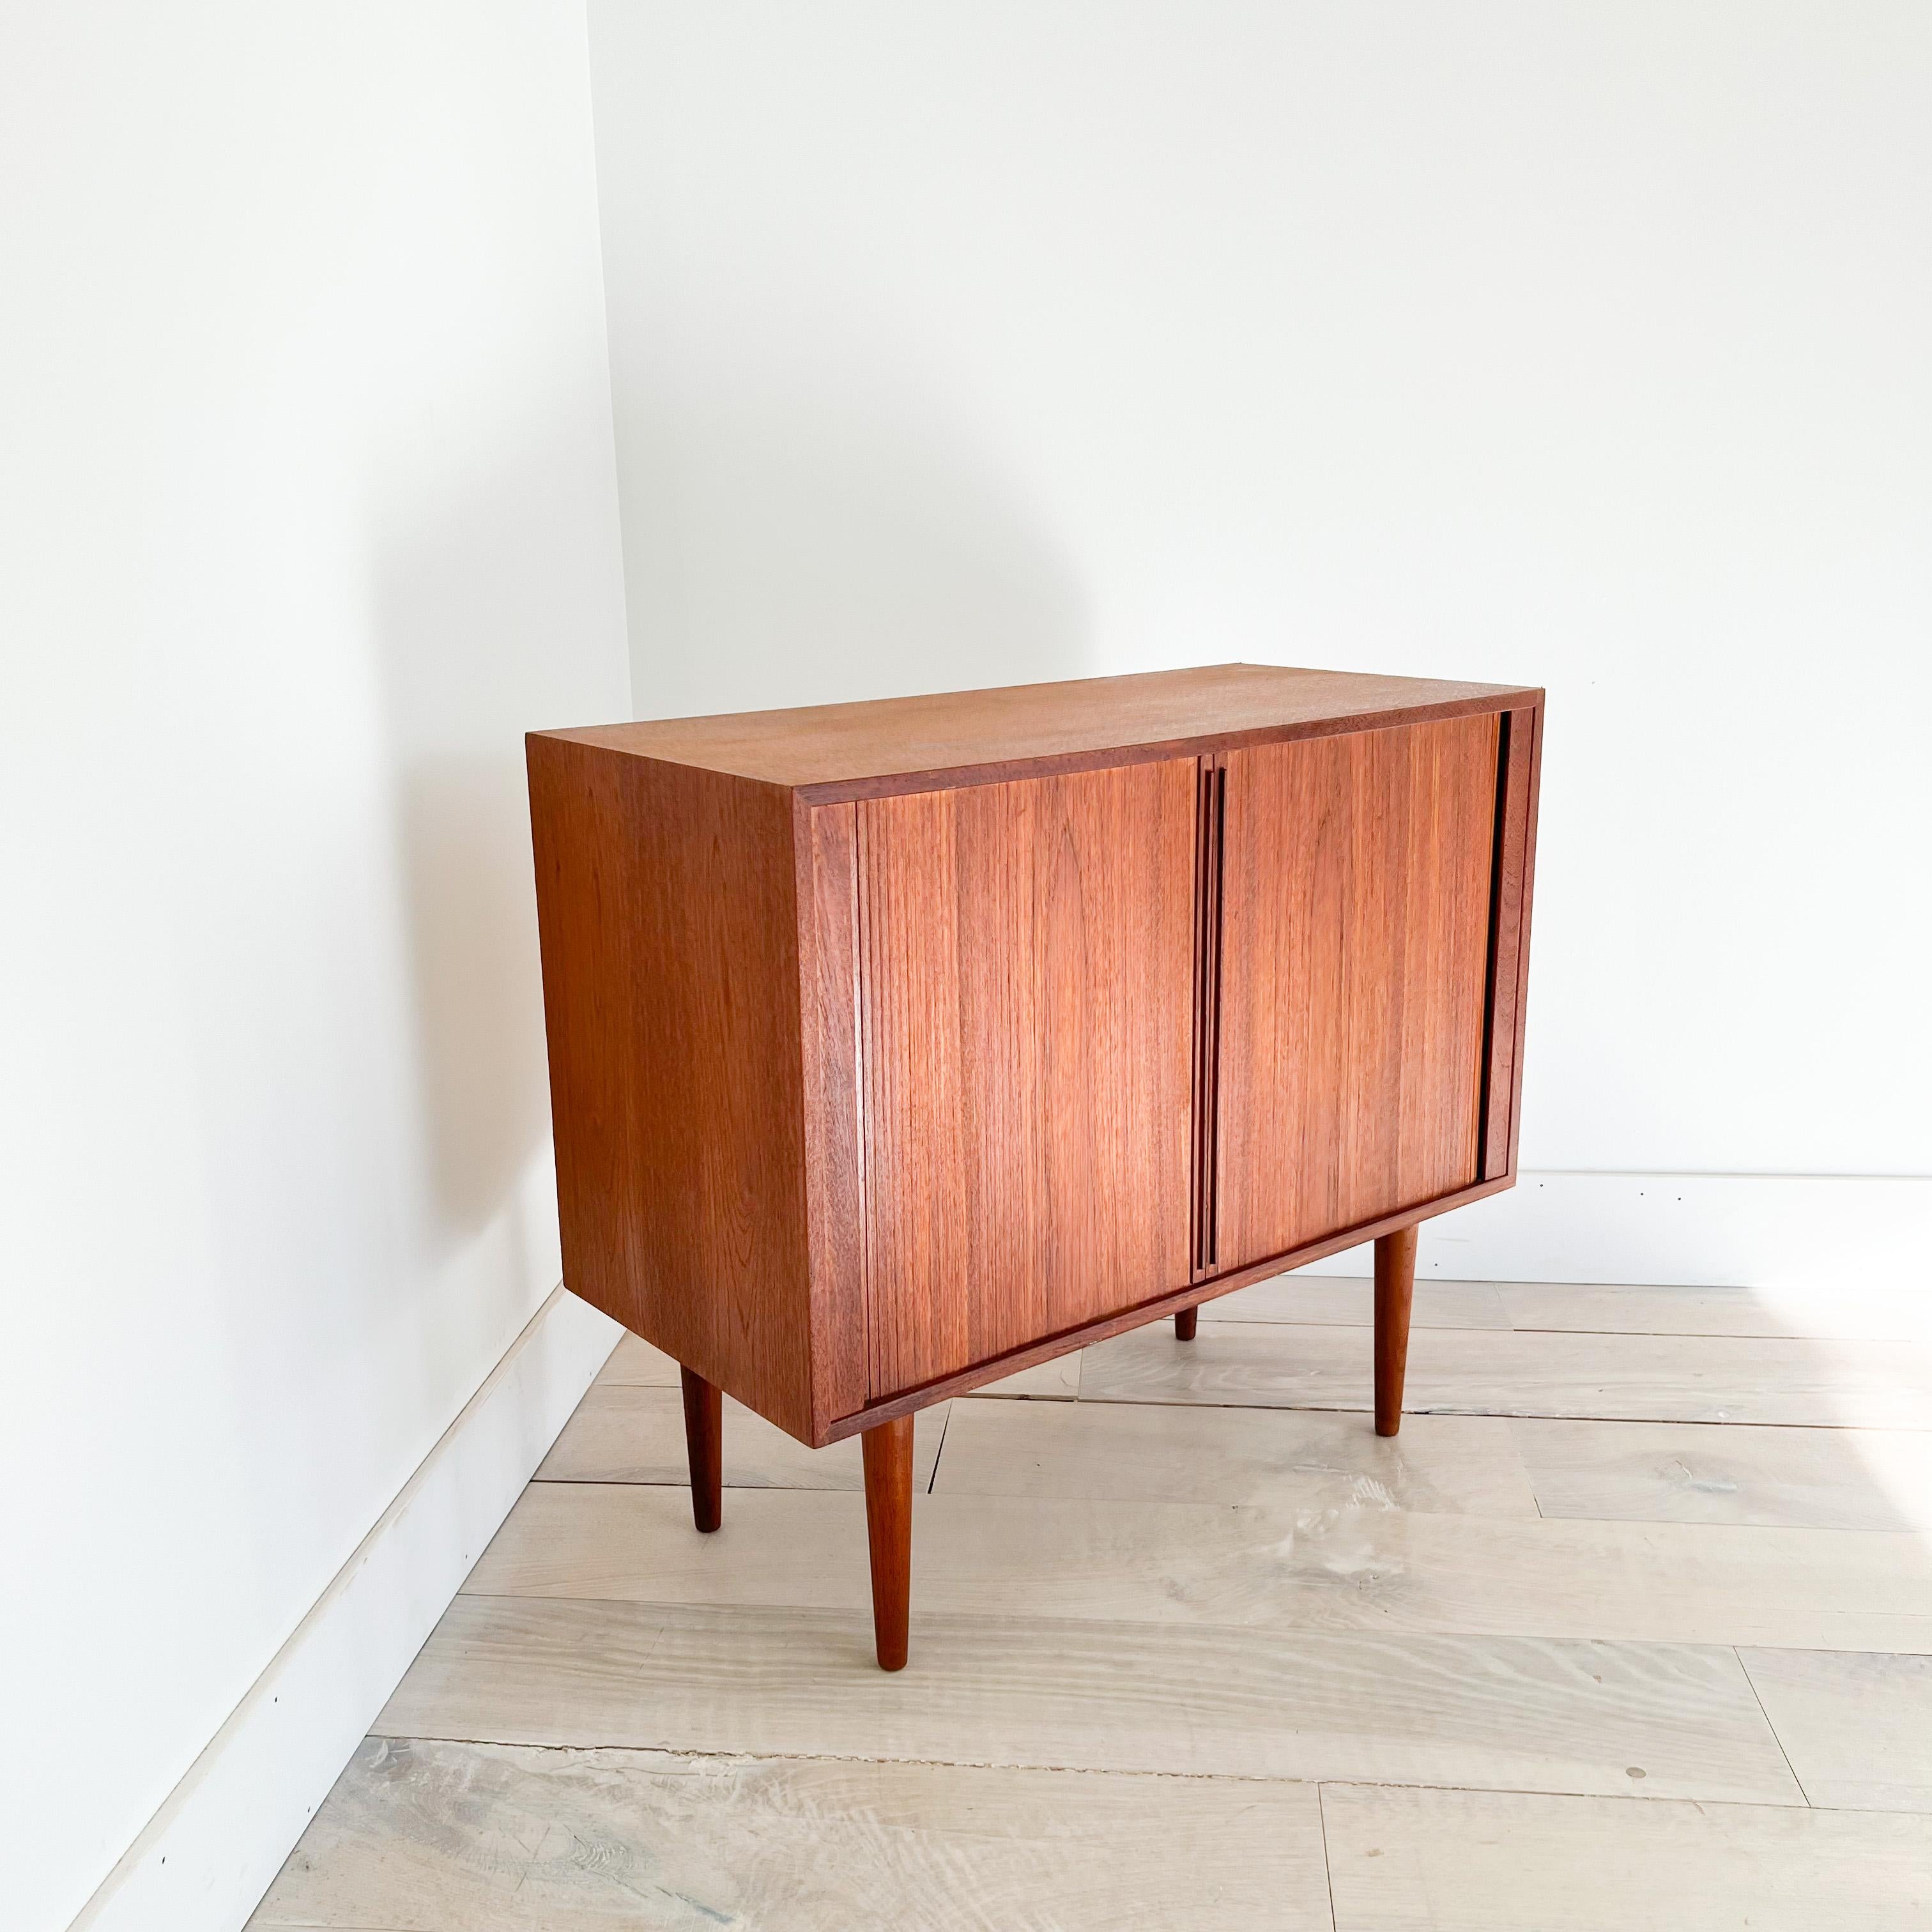 Mid-Century Modern Danish teak record cabinet with tambour doors designed by Kai Kristiansen. The top has been sanded and restored. Some light scuffing/scratching from age appropriate wear.